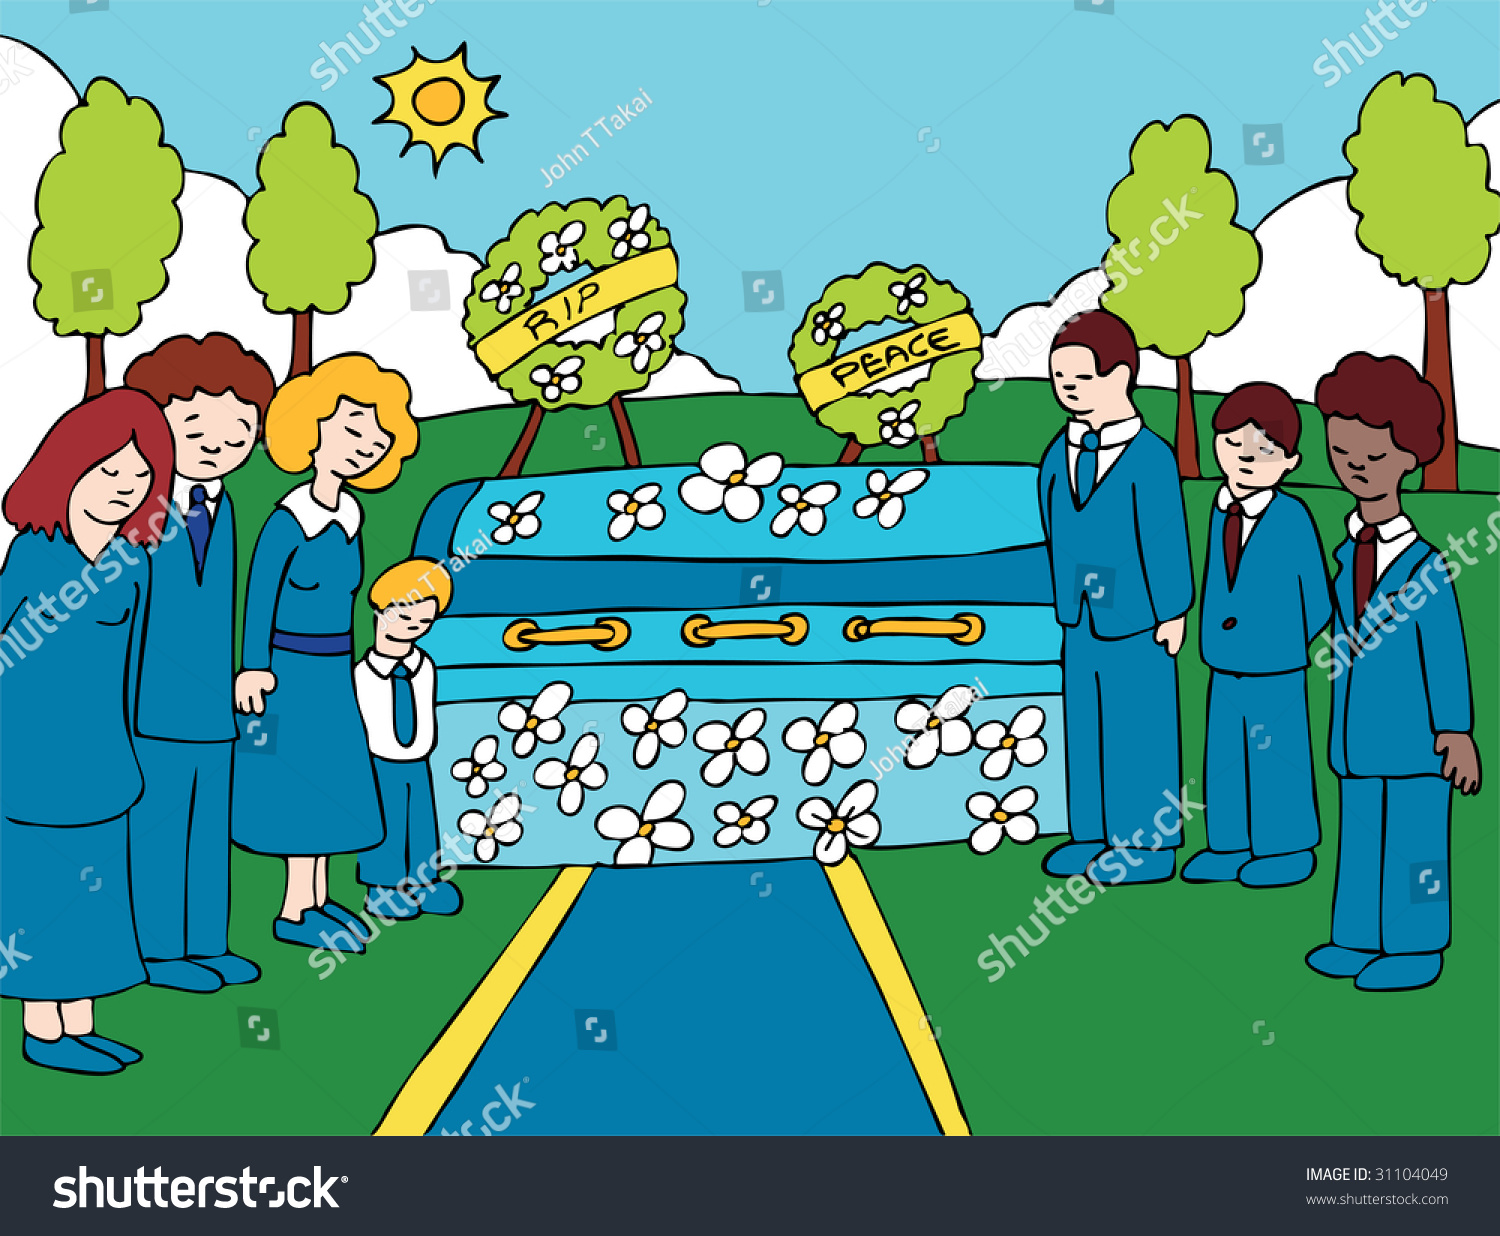 Royalty Free Cartoon Funeral People Stock Images Photos Vectors